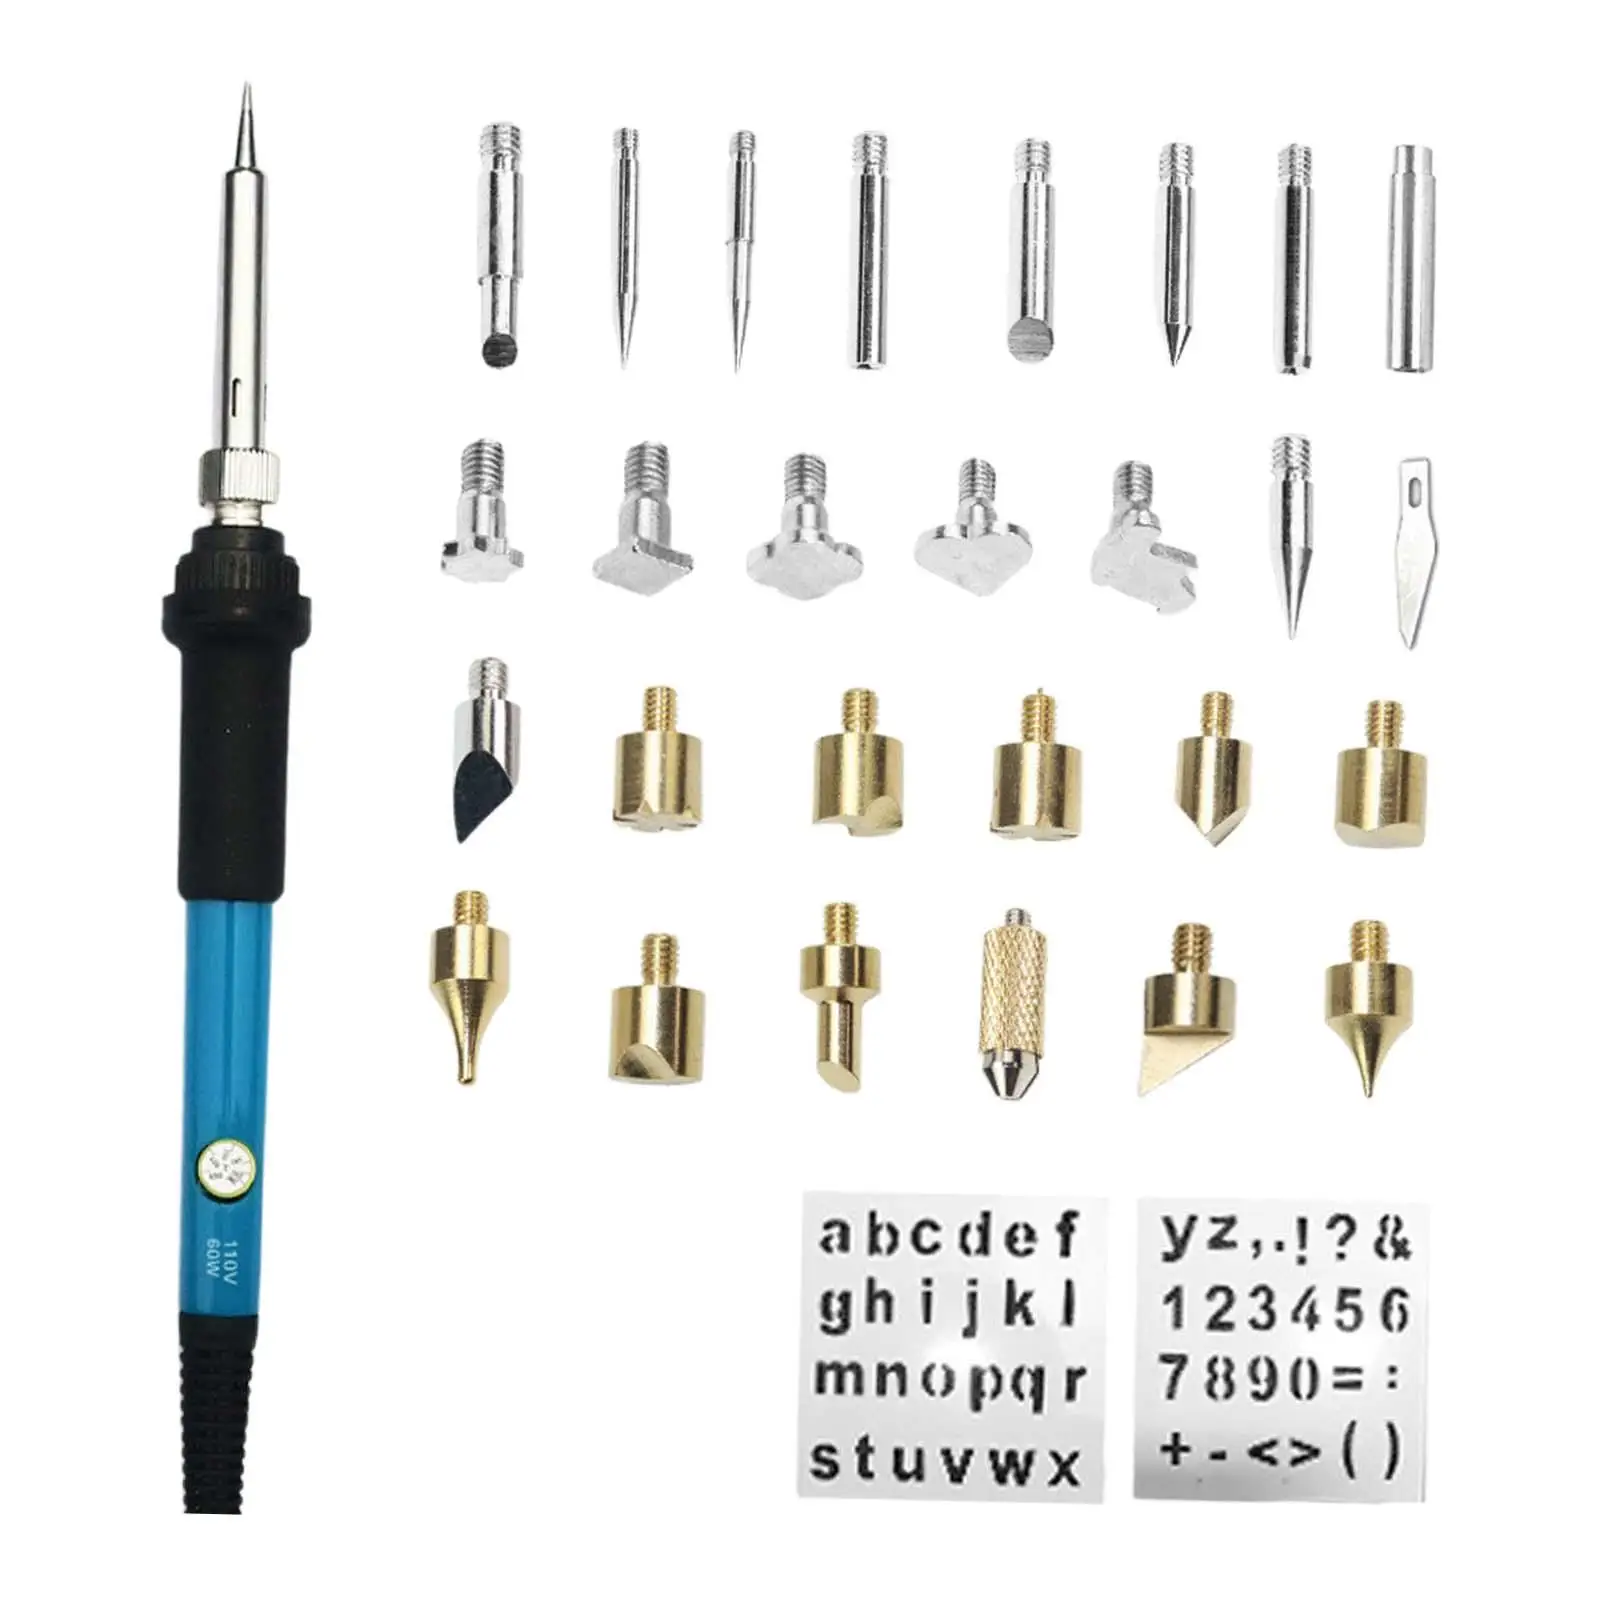 30Pcs Solder Iron Tool Jewelry Wood Painting Electric Welding Repair Tool 60W Portable Temperature Adjustable Soldering Iron Kit